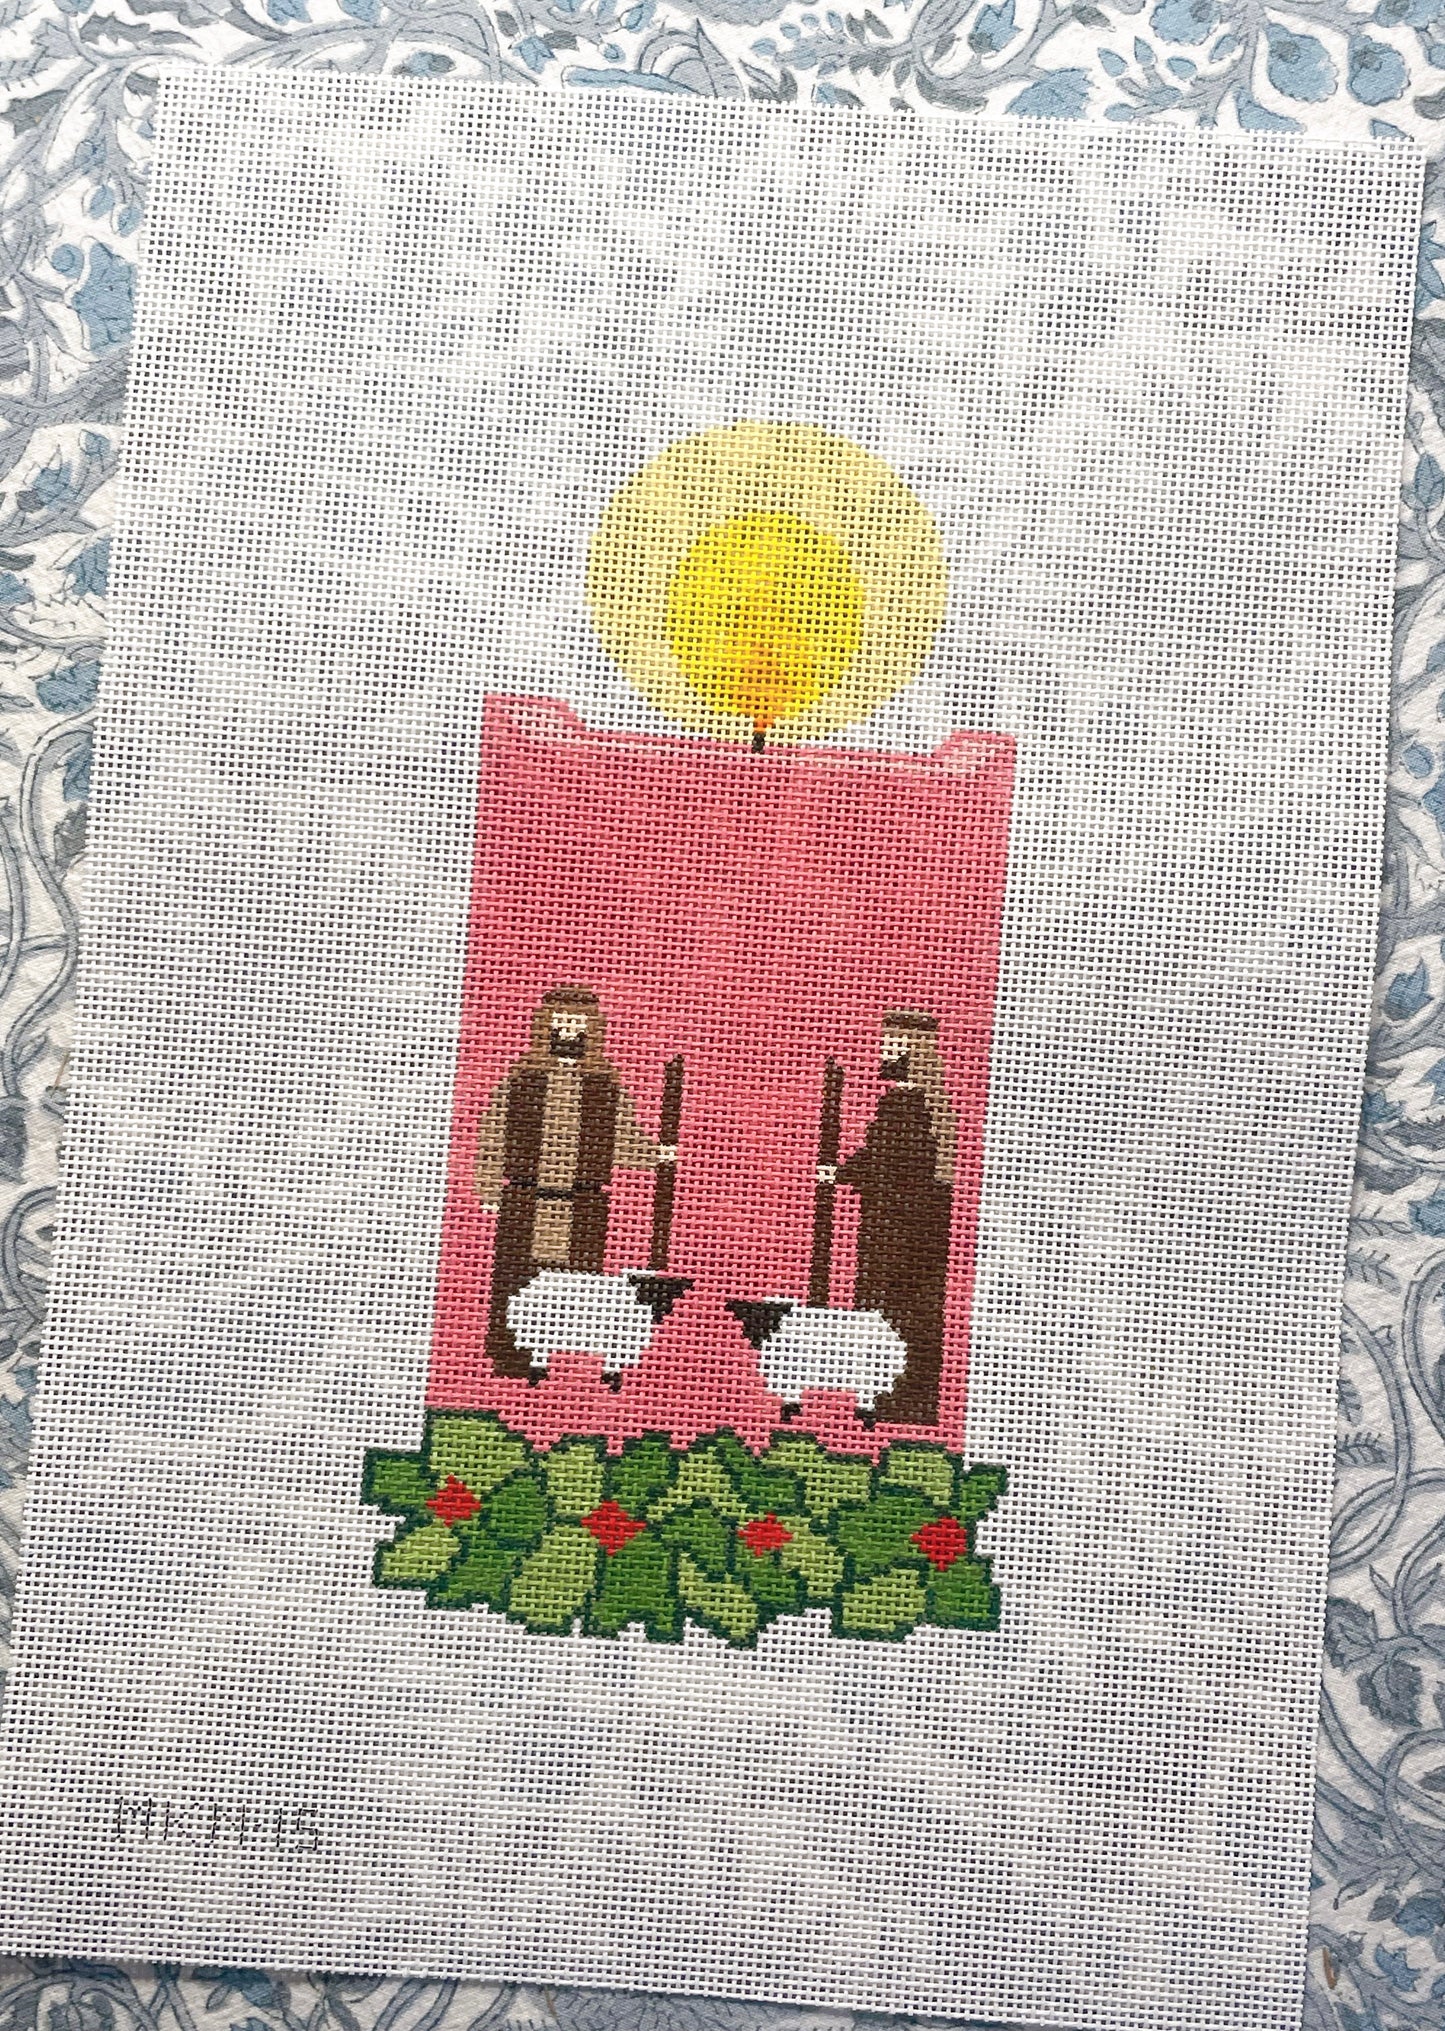 third advent candle - shepherds